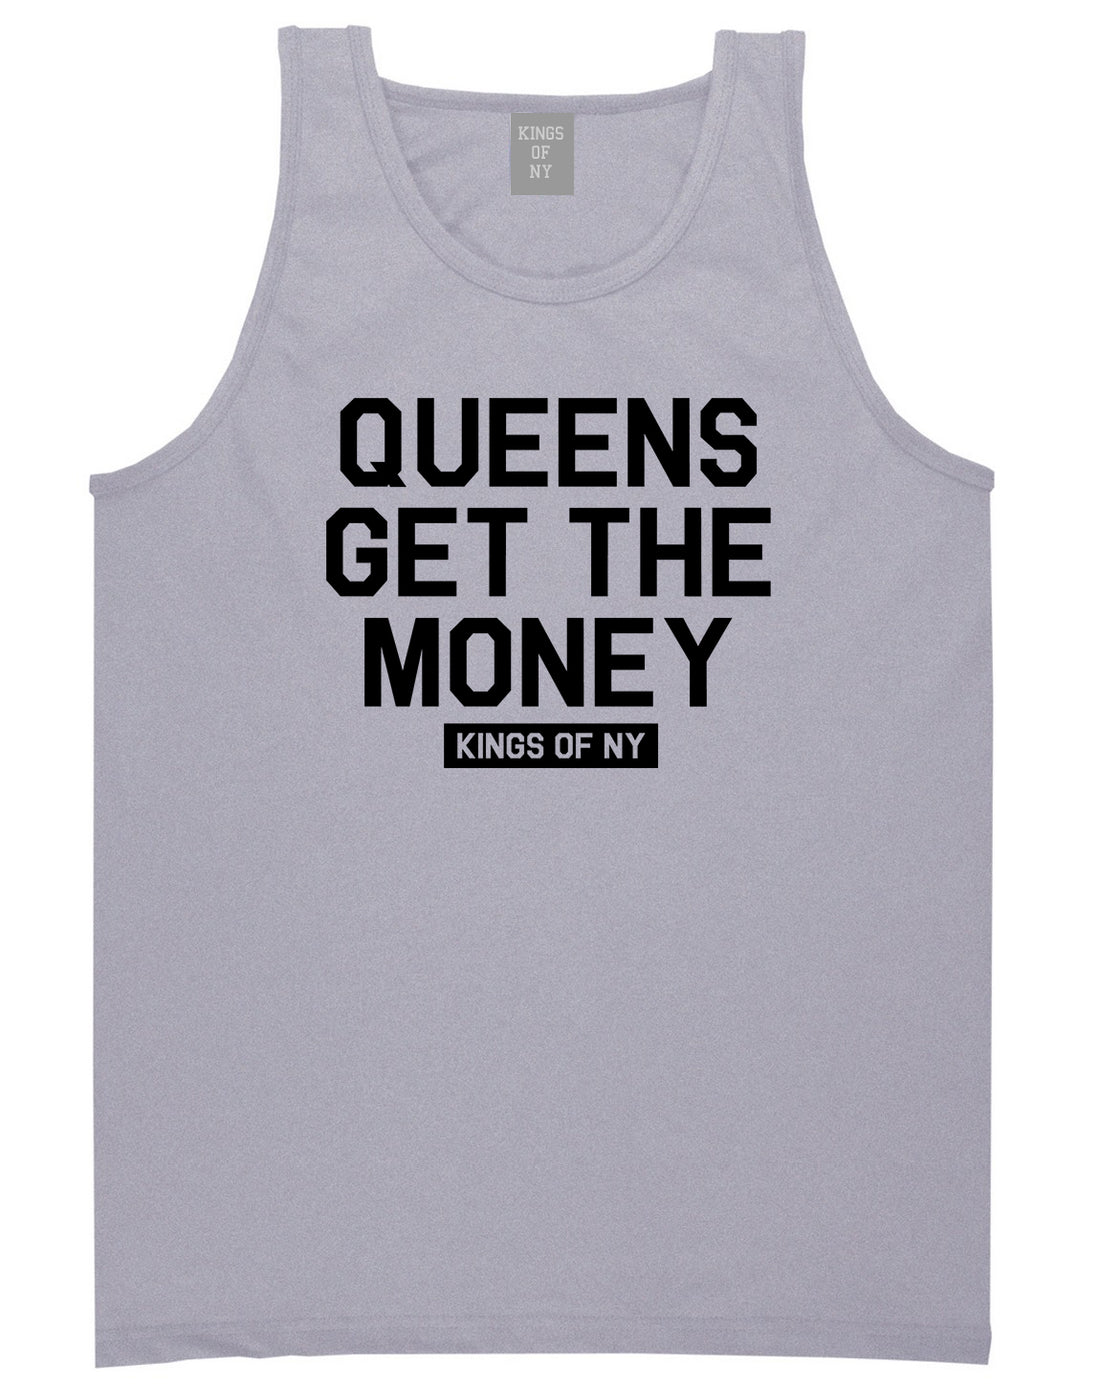 Queens Get The Money Mens Tank Top Shirt Grey by Kings Of NY